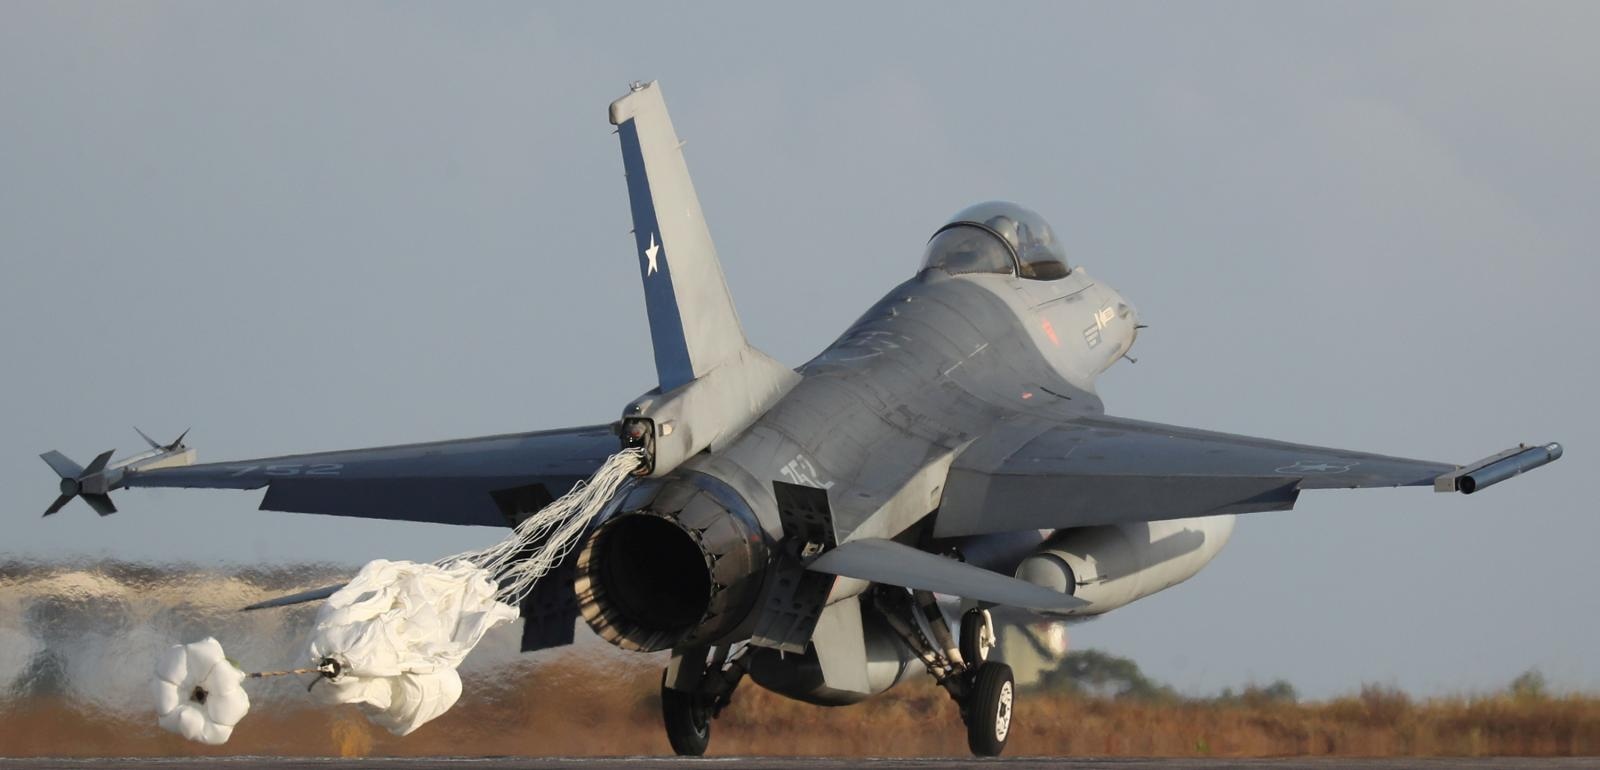 FILE PHOTO: A Chilean Air Force F-16 jet fighter lands at an airbase during CRUZEX multinational air exercise in Natal FILE PHOTO: A Chilean Air Force F-16 jet fighter lands at an airbase during CRUZEX, a multinational air exercise hosted by the Brazilian Air Force, in Natal, Brazil November 21, 2018. REUTERS/Paulo Whitaker/File Photo Paulo Whitaker